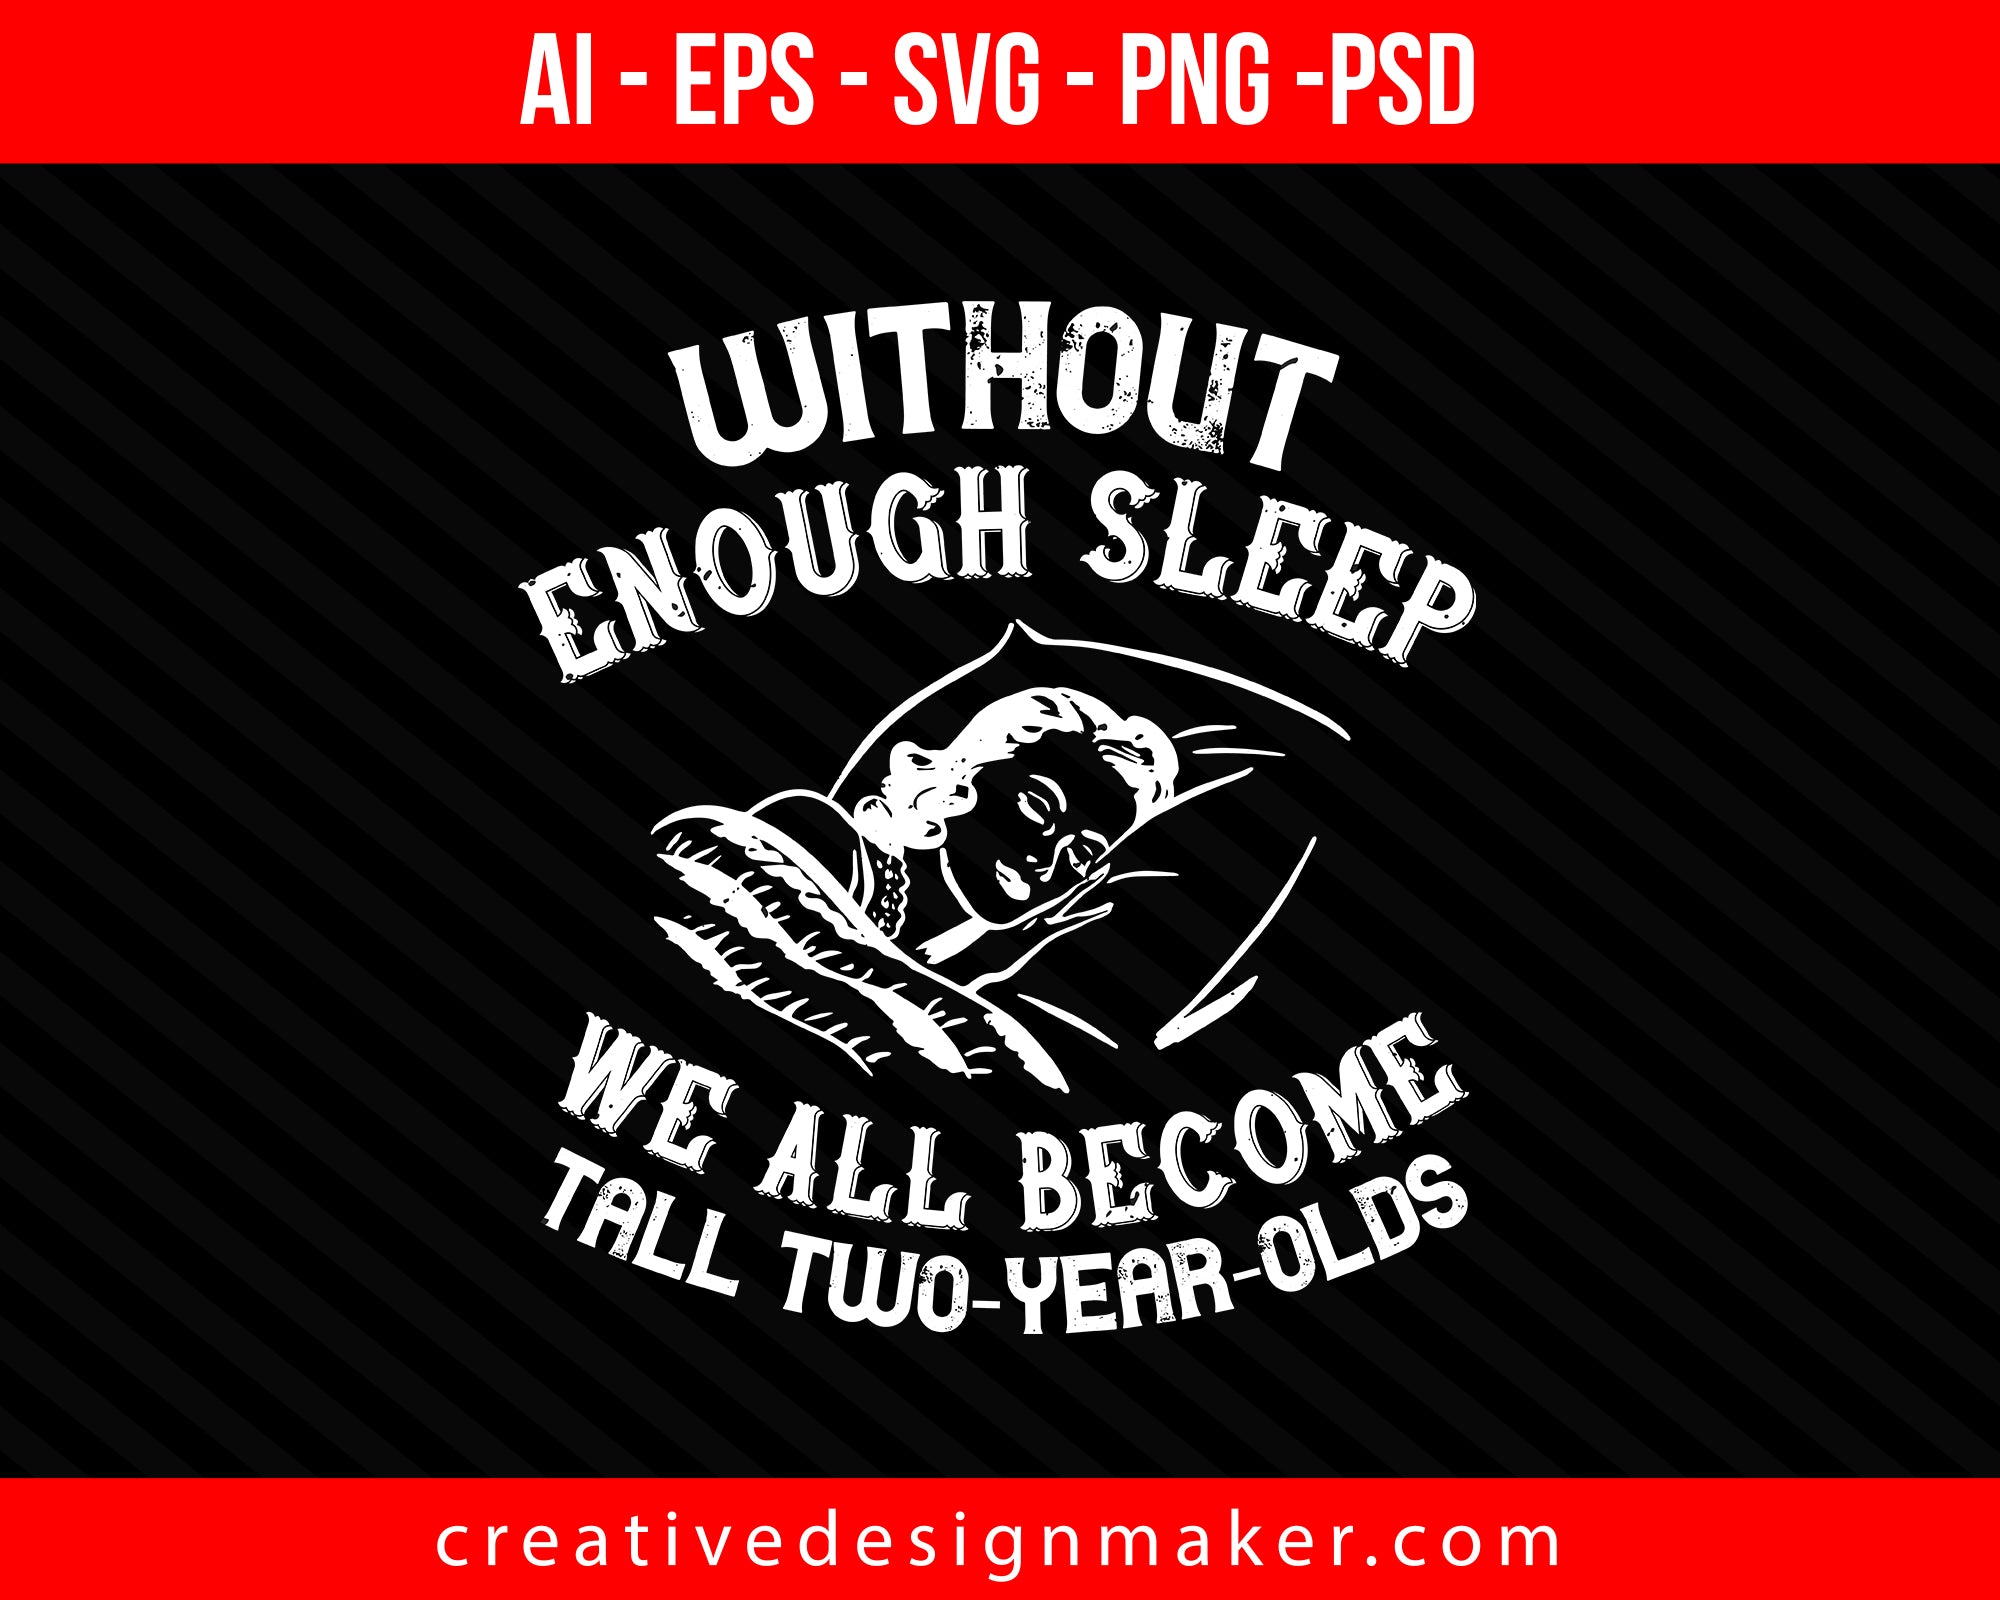 Without enough sleep, we all become tall two-year-olds Print Ready Editable T-Shirt SVG Design!